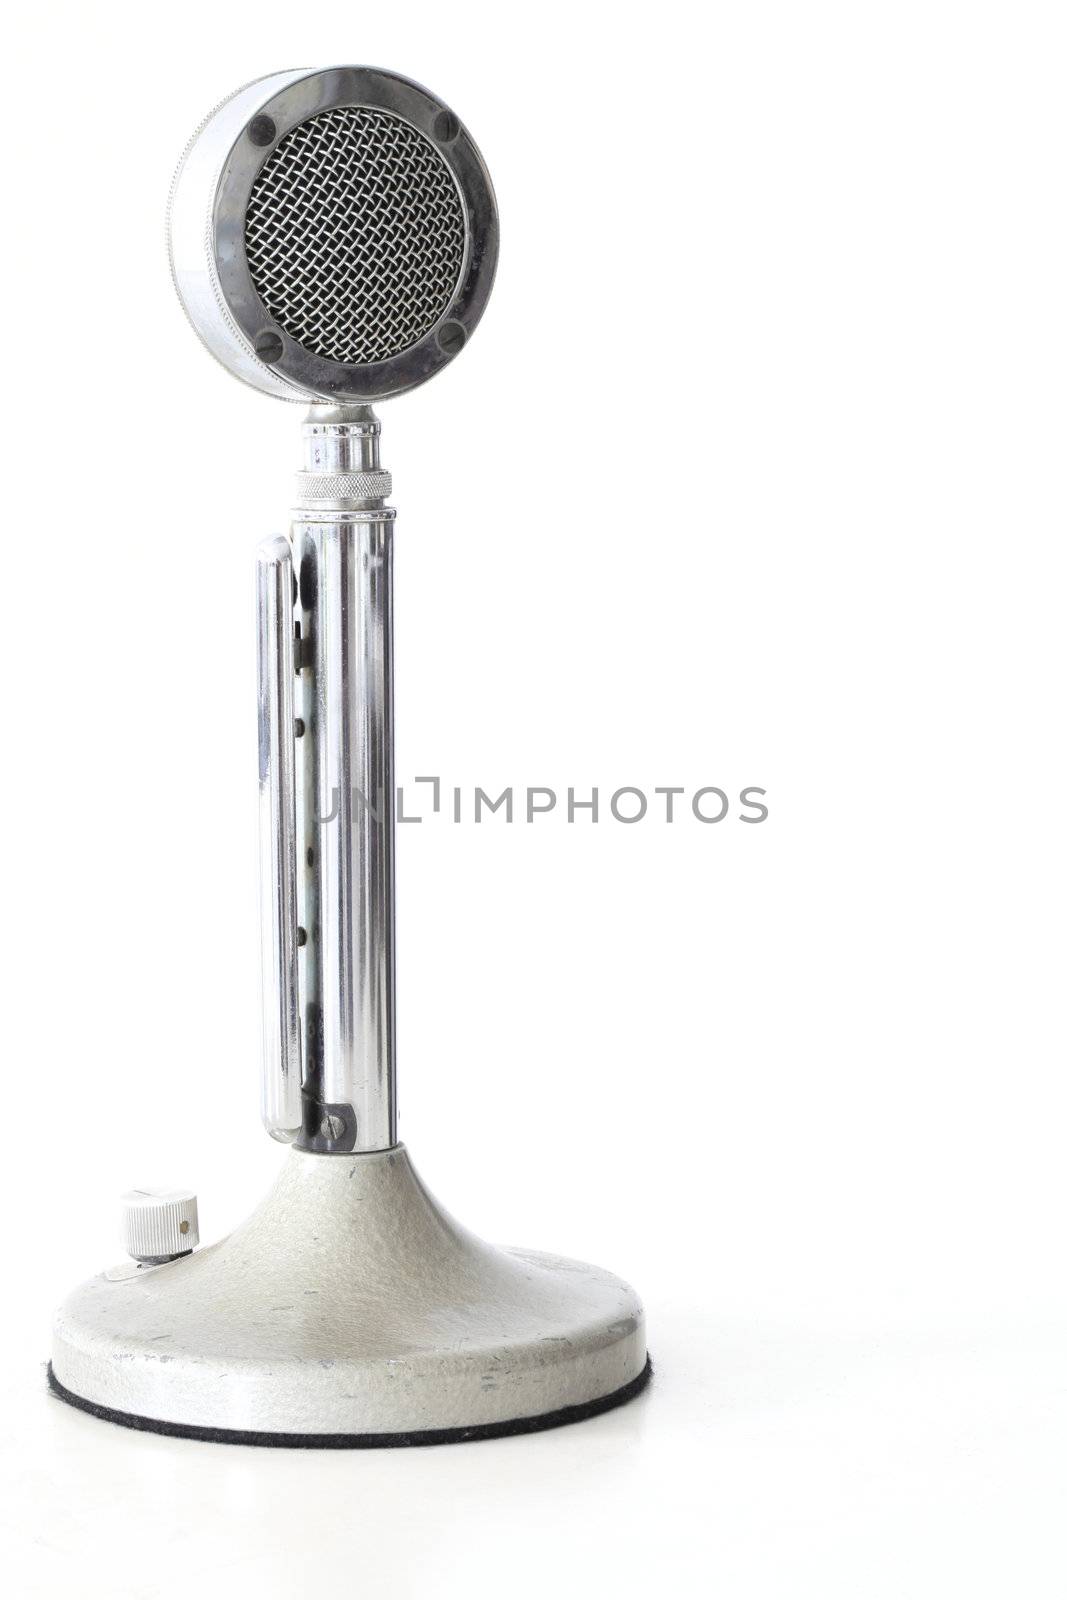 retro Microphone by vichie81